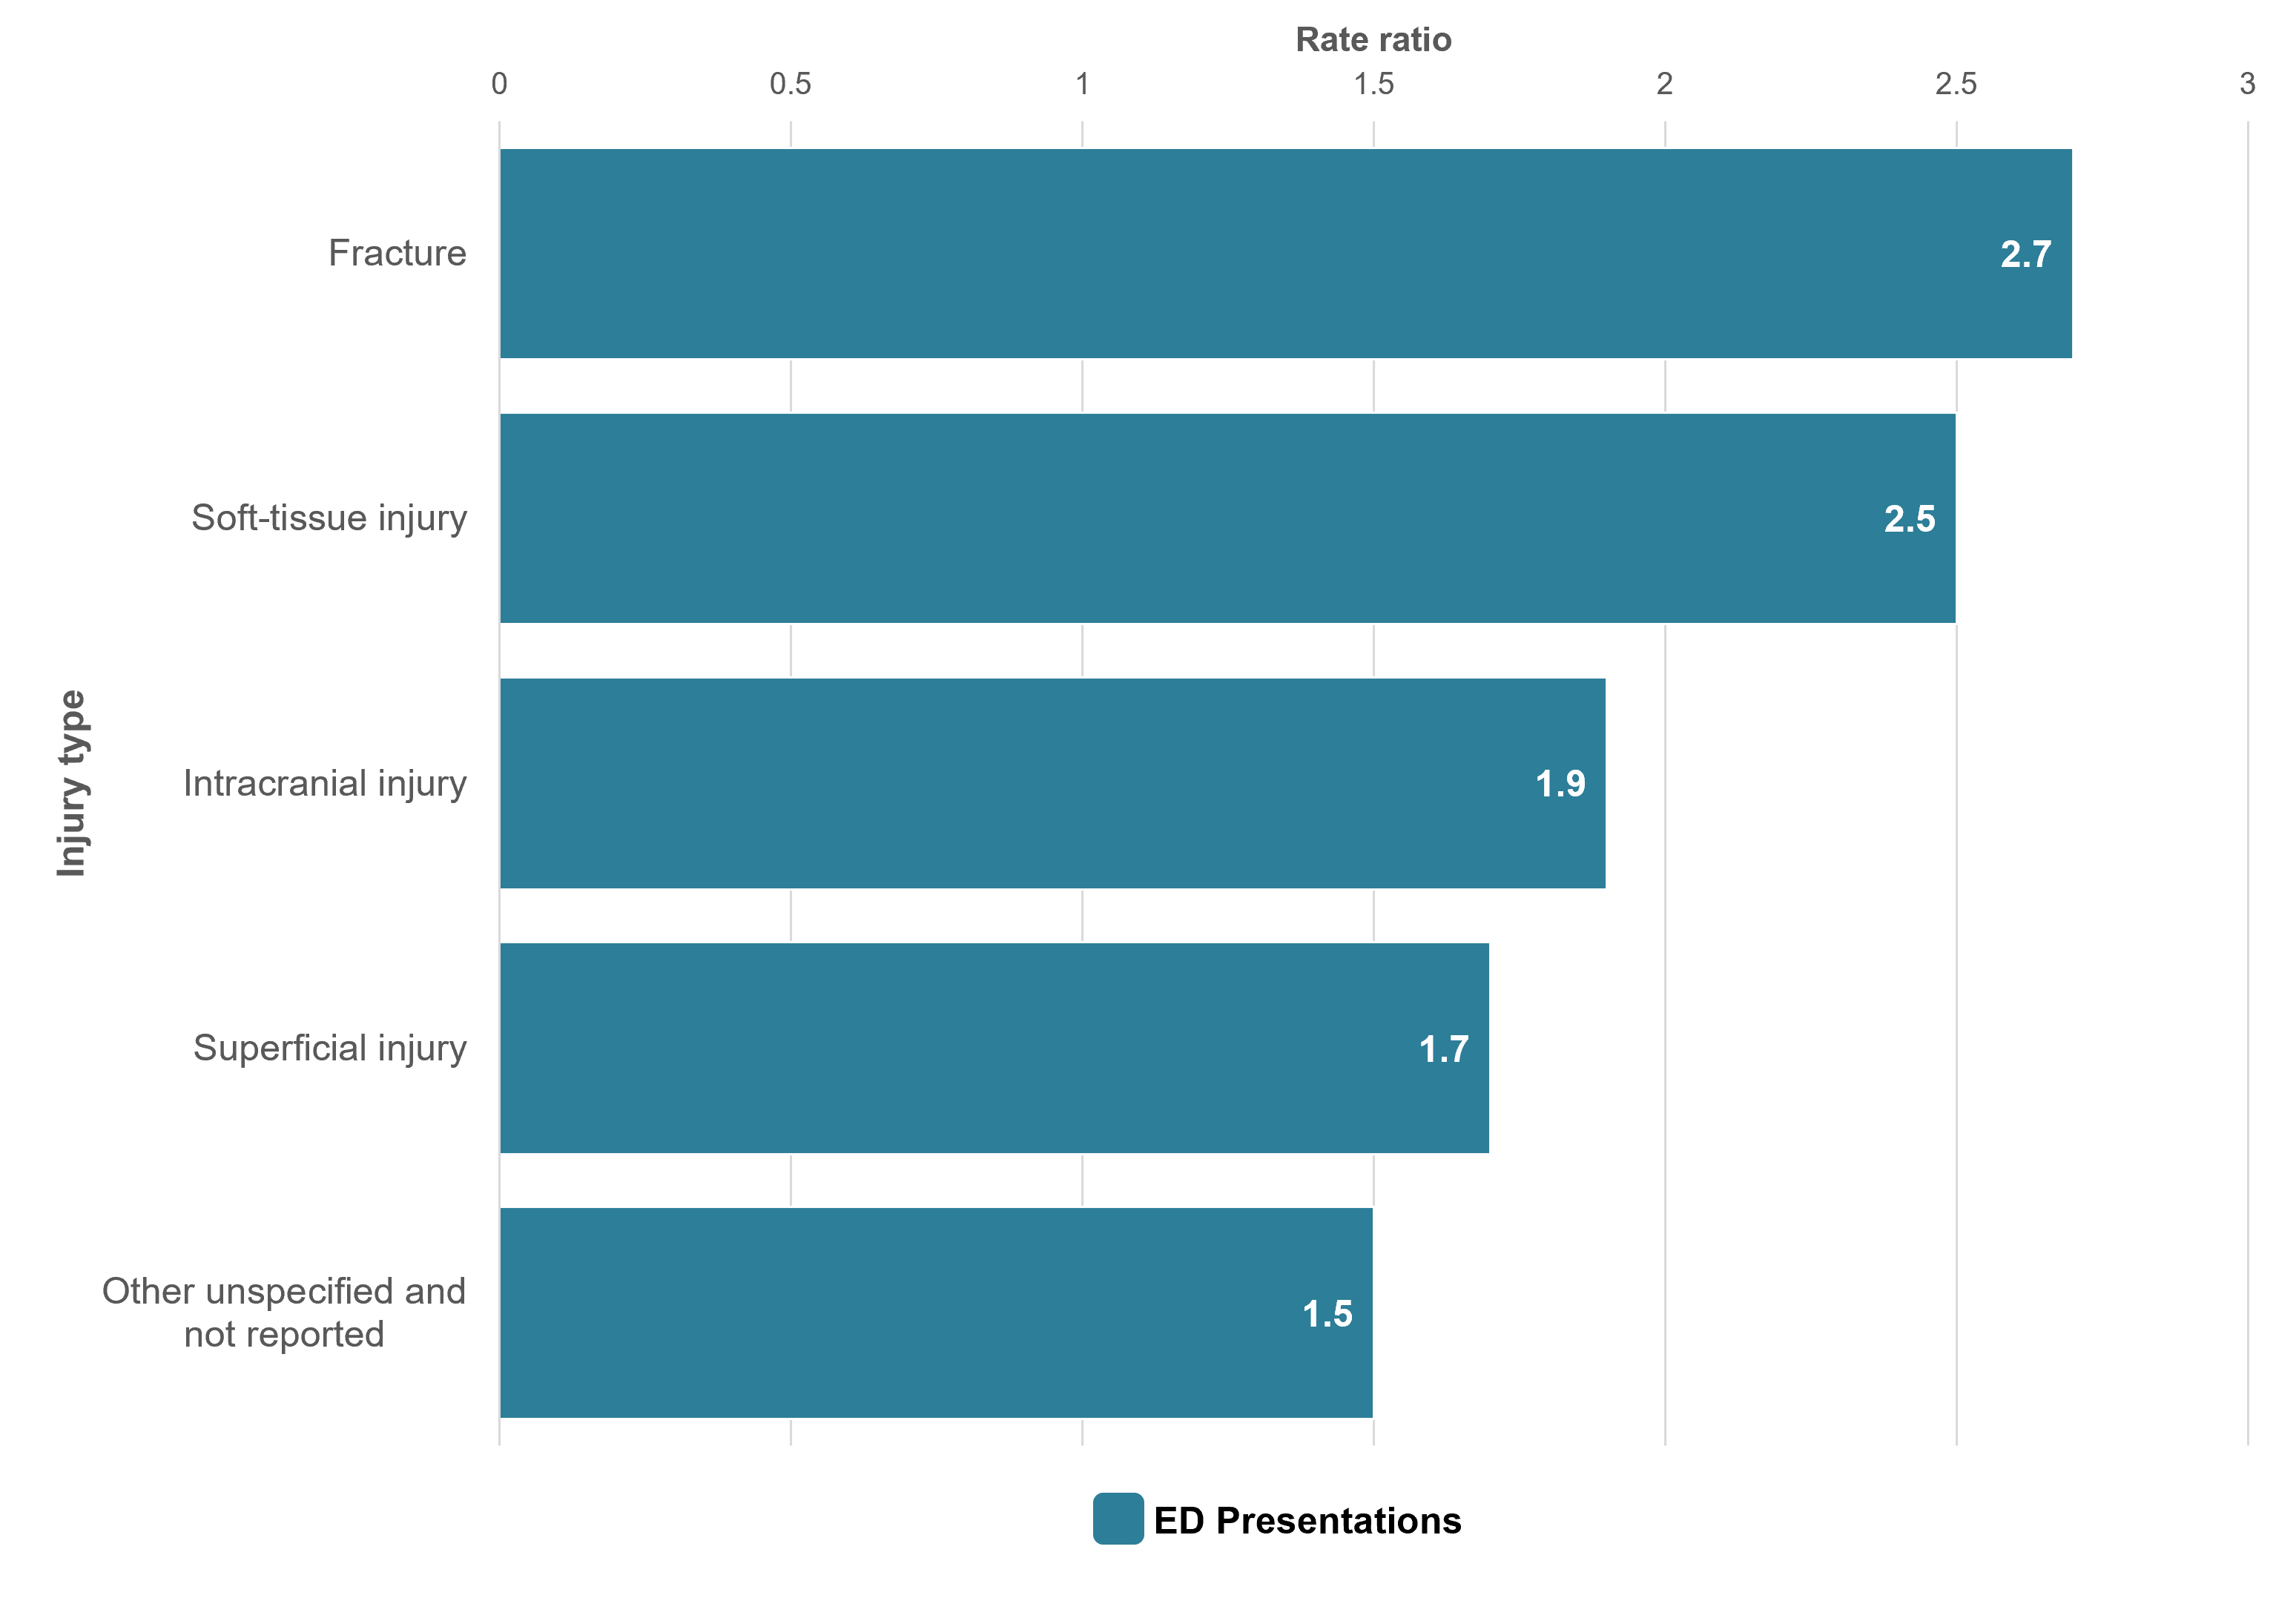 A bar graph showing the rate ratios for types of injury where children aged 10-12 are overrepresented compared to adults.